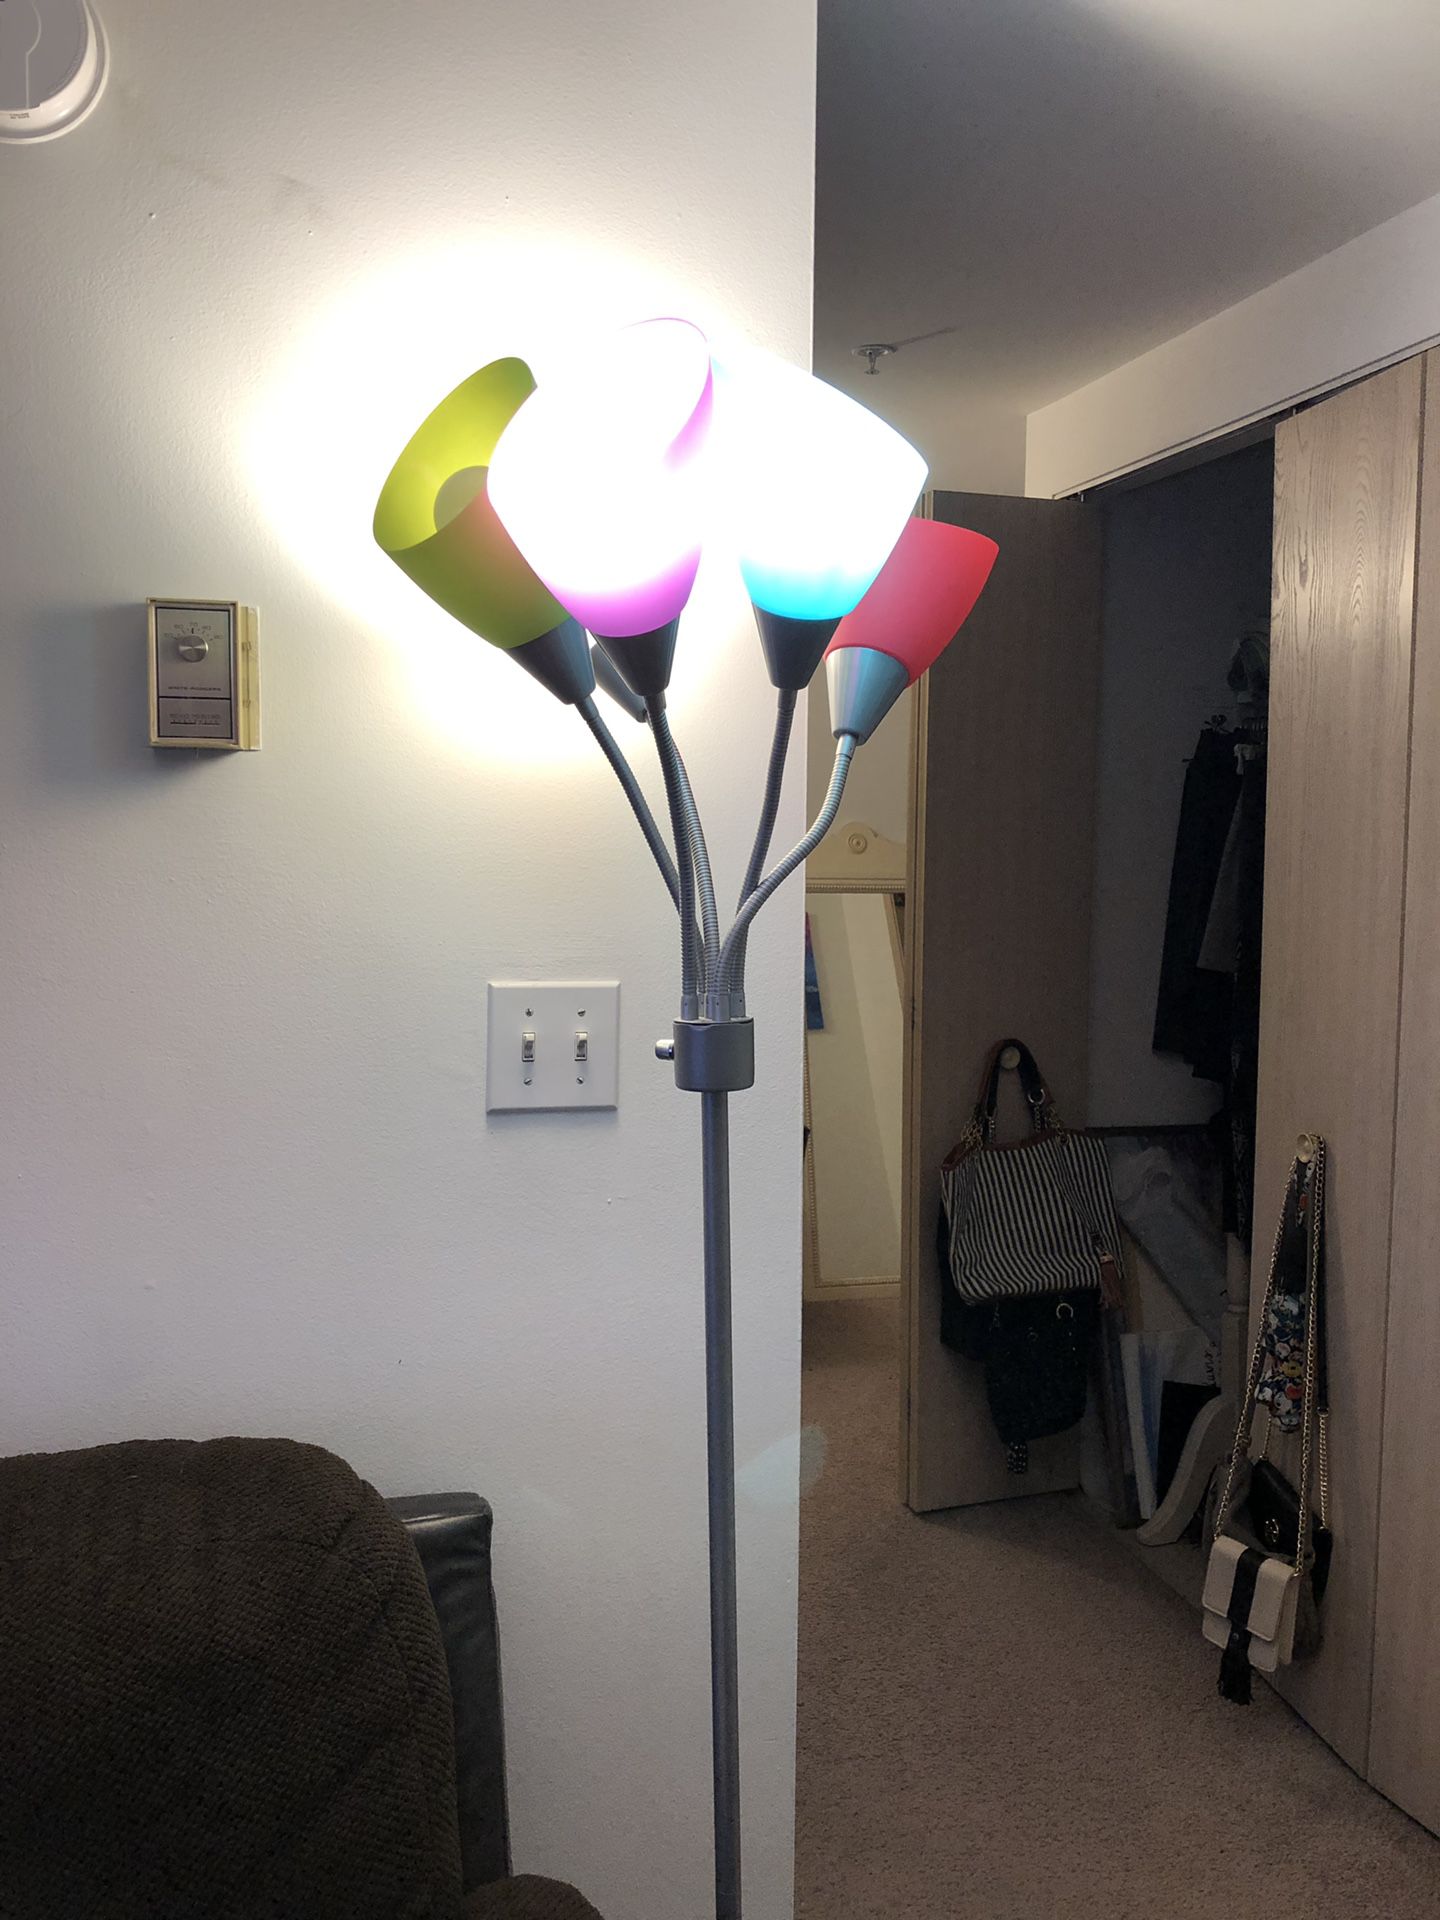 5 Pronged Multi-colored Tall Light